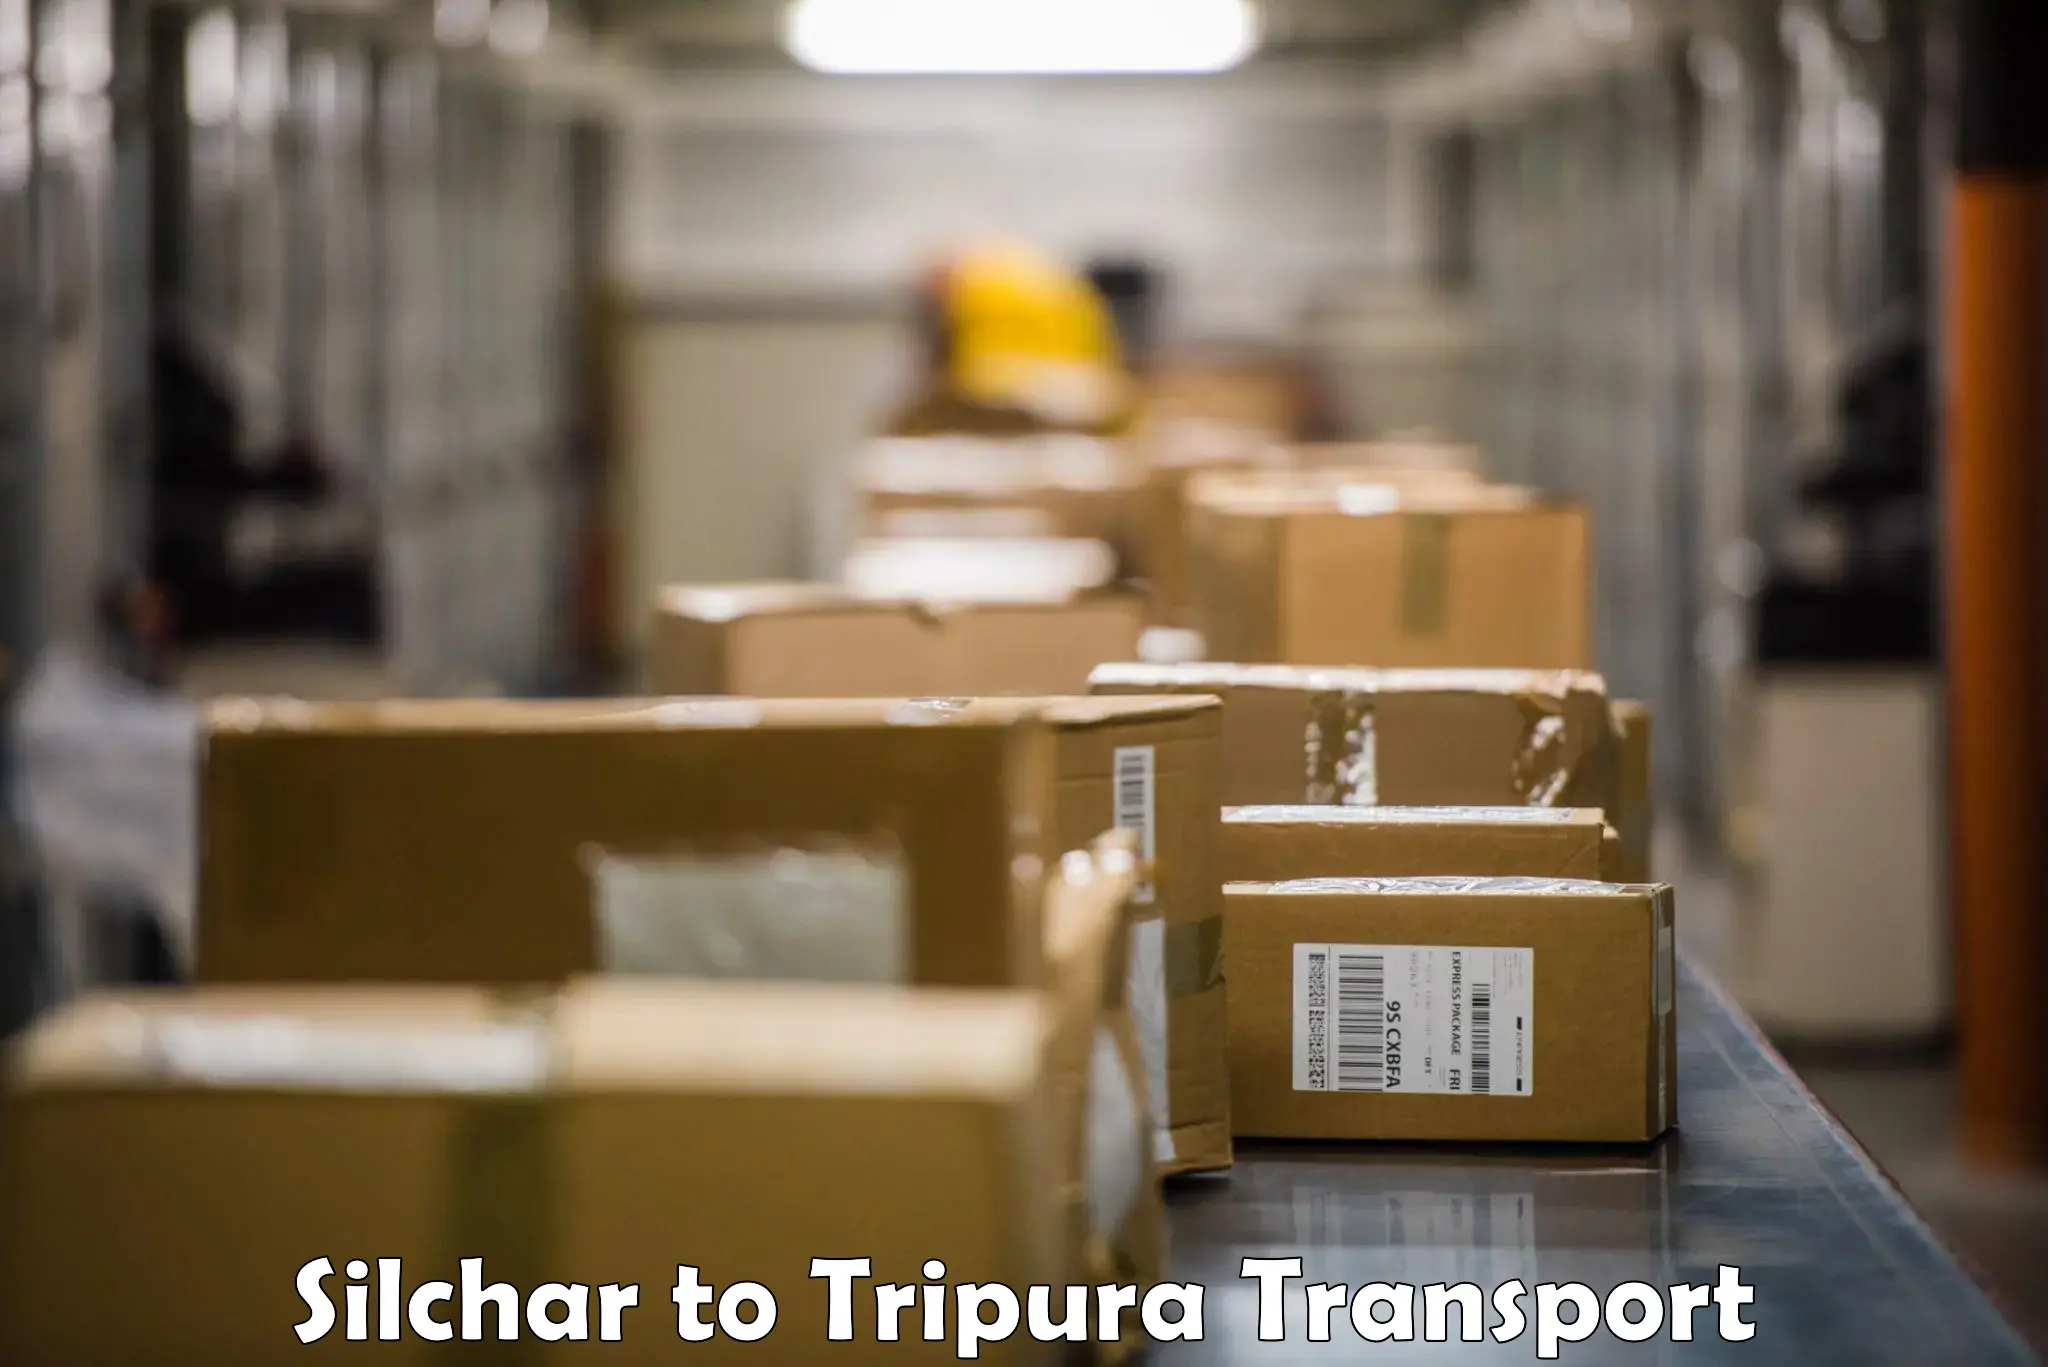 Daily parcel service transport Silchar to Agartala